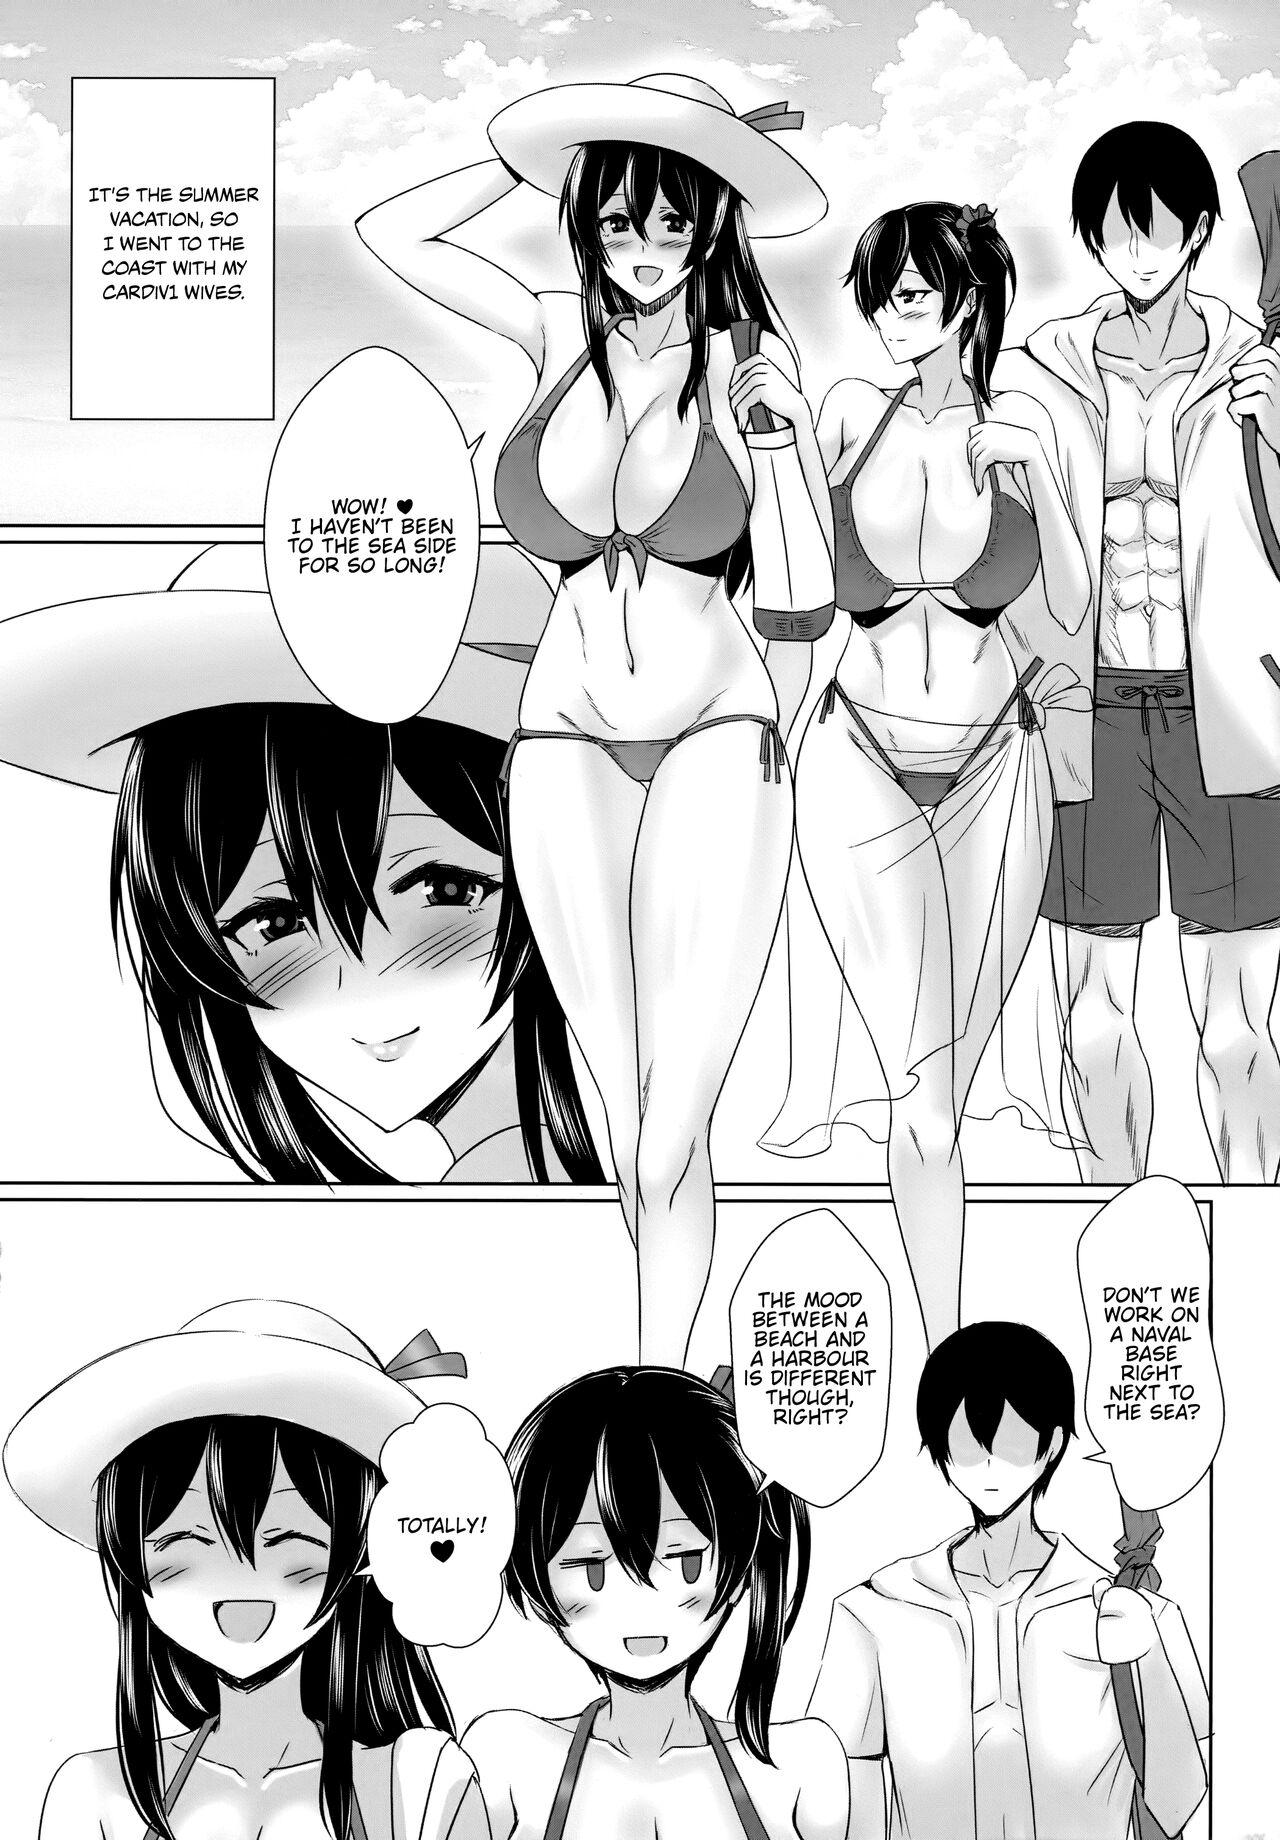 Summer with Fleet Carrier Wives 1